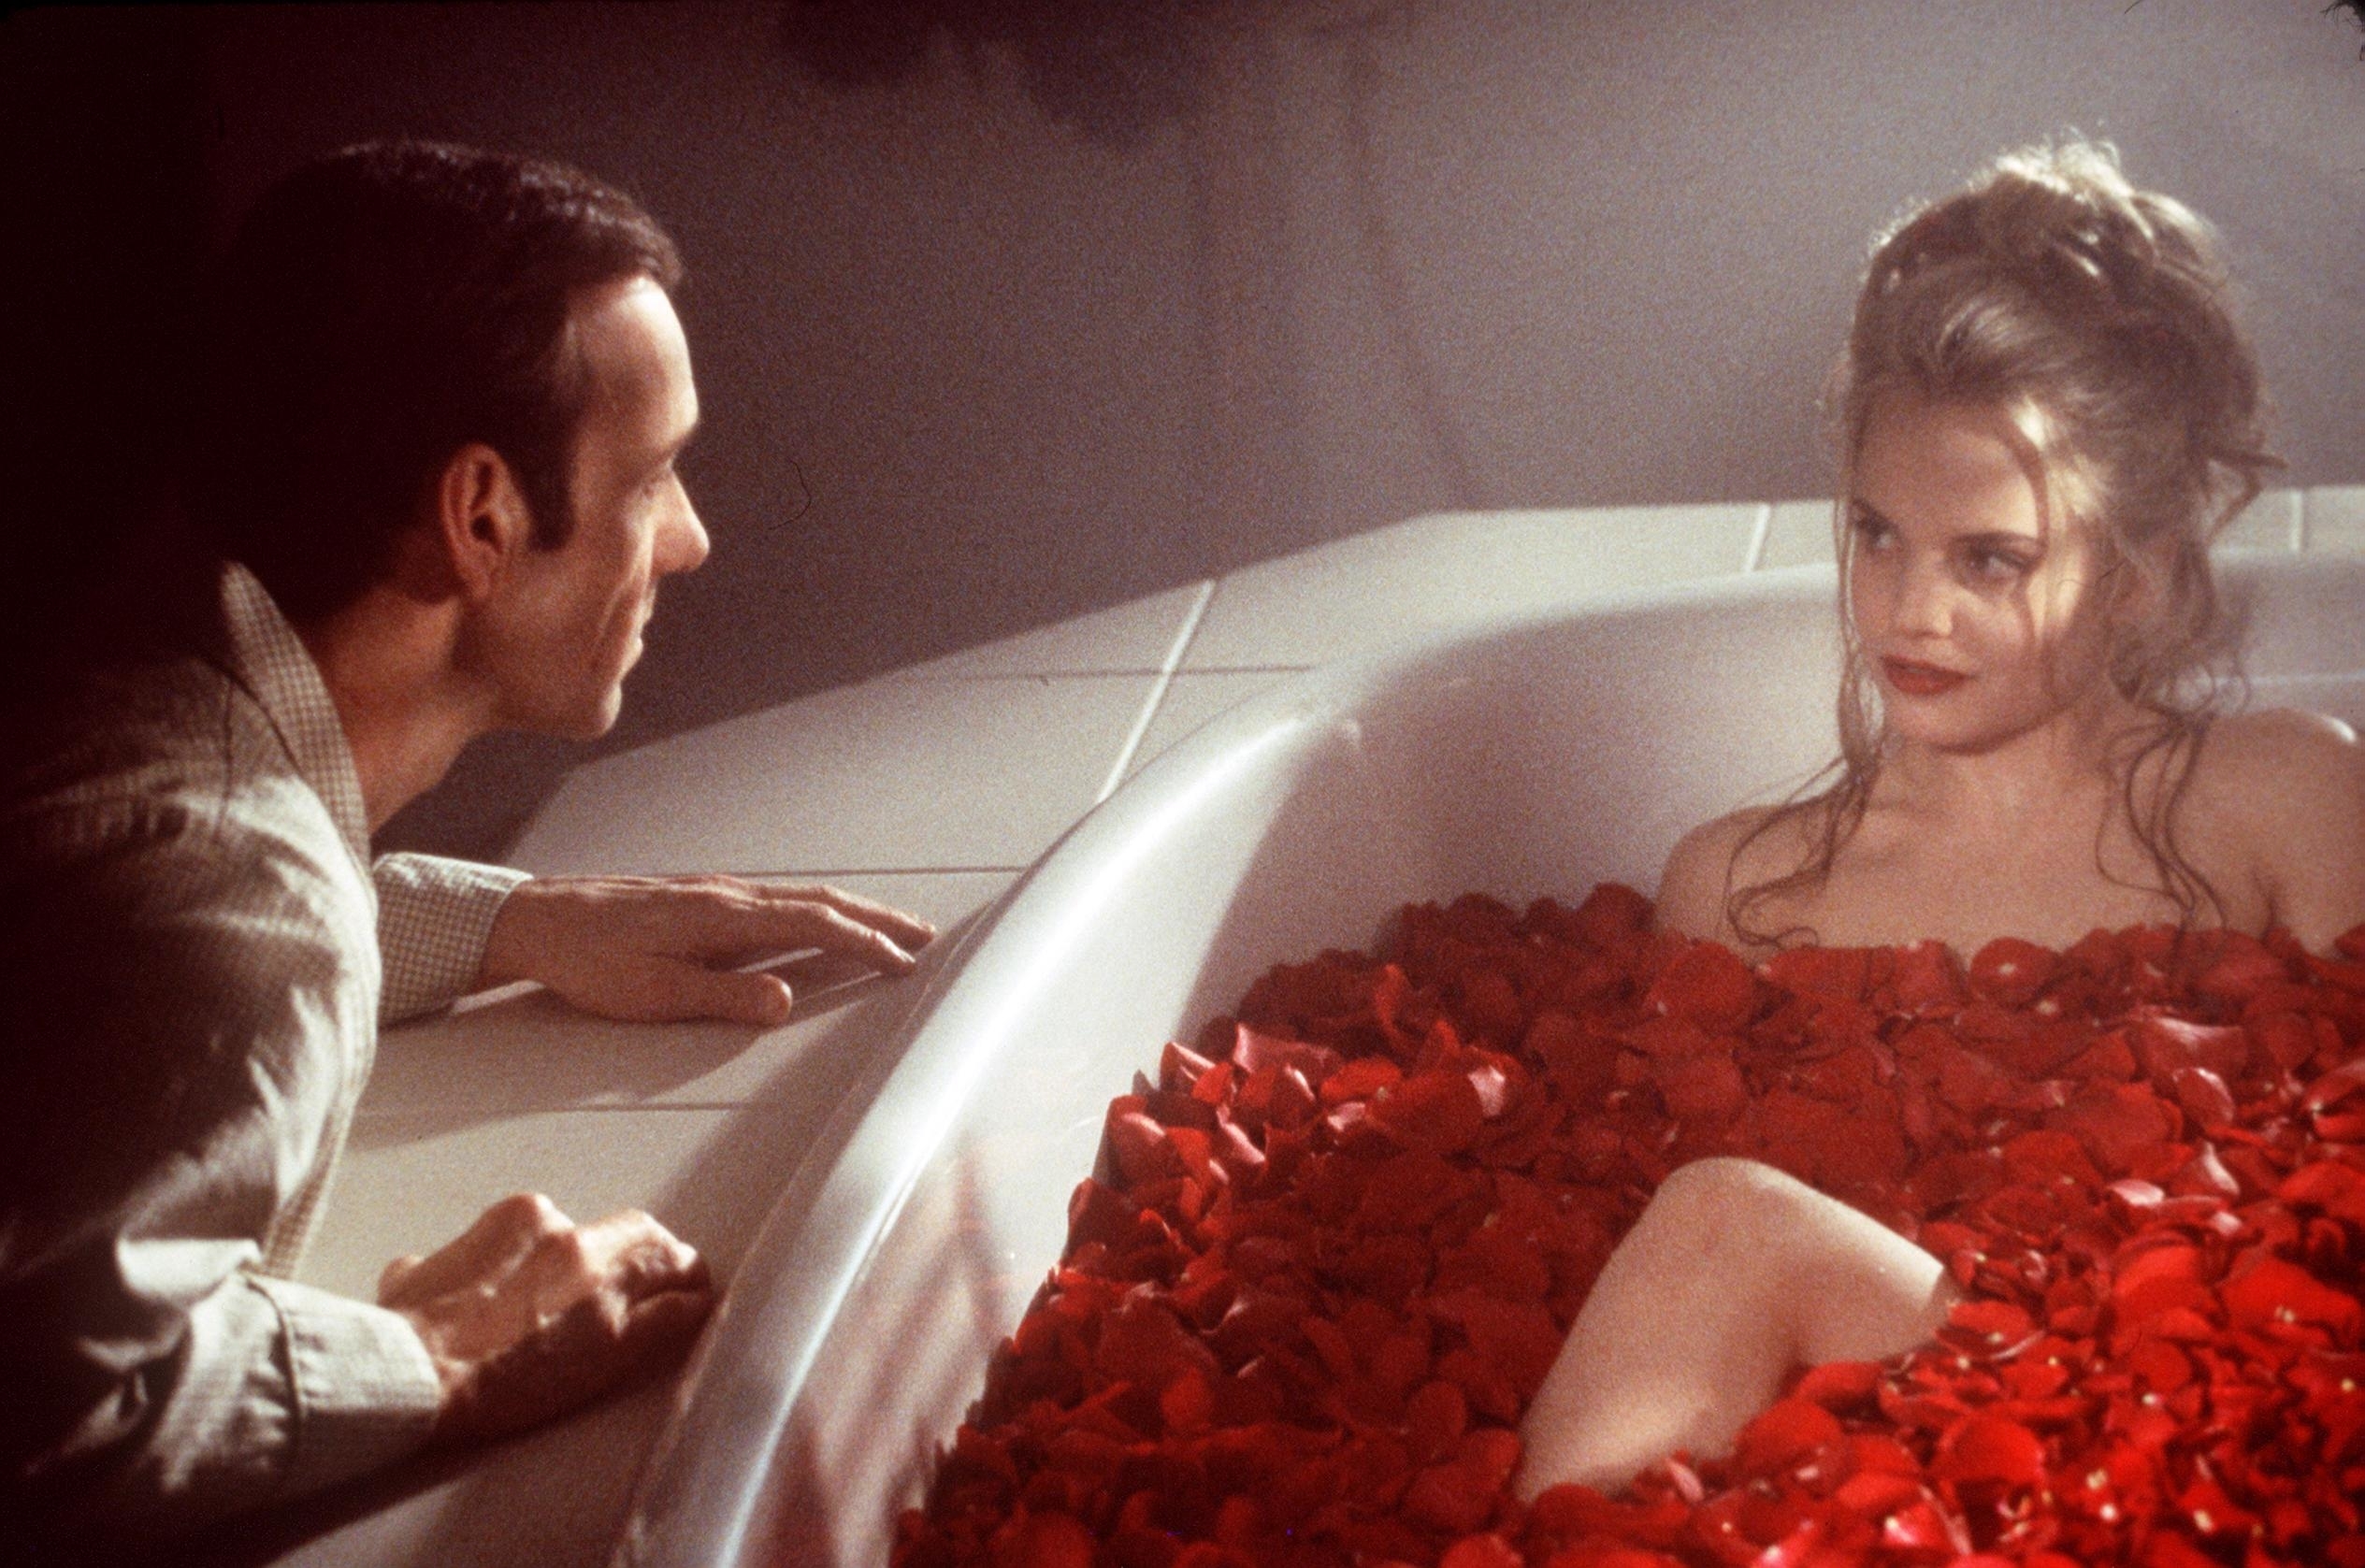 A scene from American Beauty with Kevin and Mena Suvari